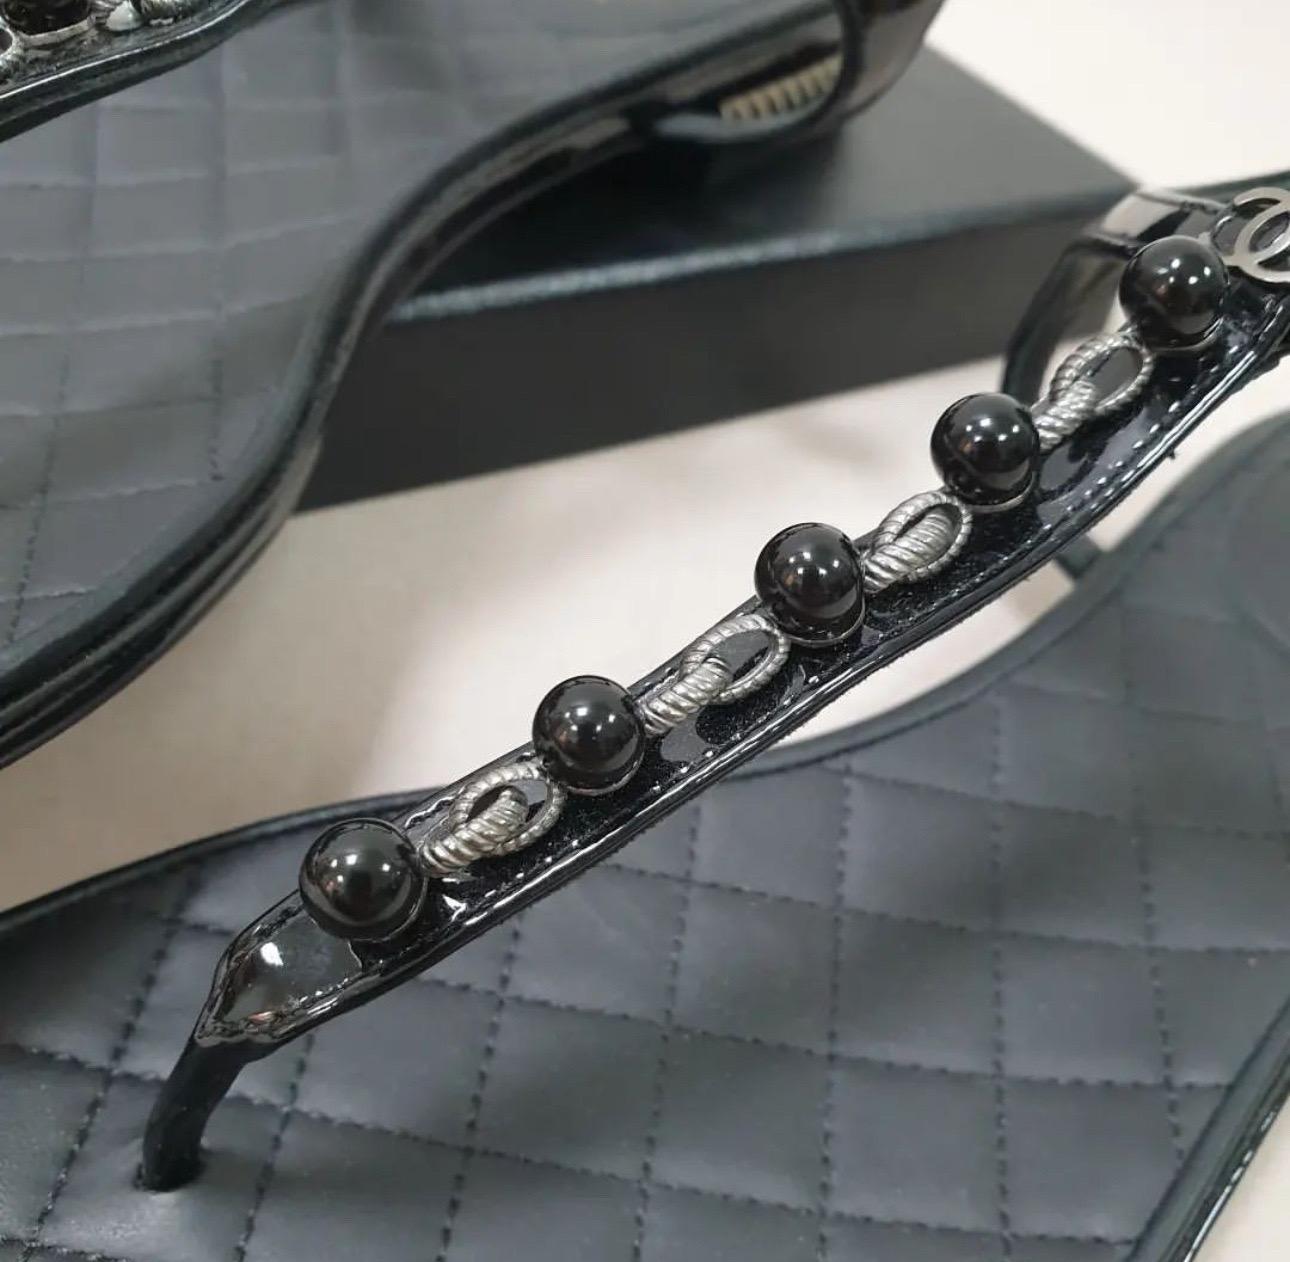 CHANEL Patent Bead Chain Thong Sandals in Black. 
These stylish thong sandals are crafted of black patent leather with quilted lambskin leather soles. 
The strap features the signature Chanel beaded chain detailing. 
They feature adjustable ankle